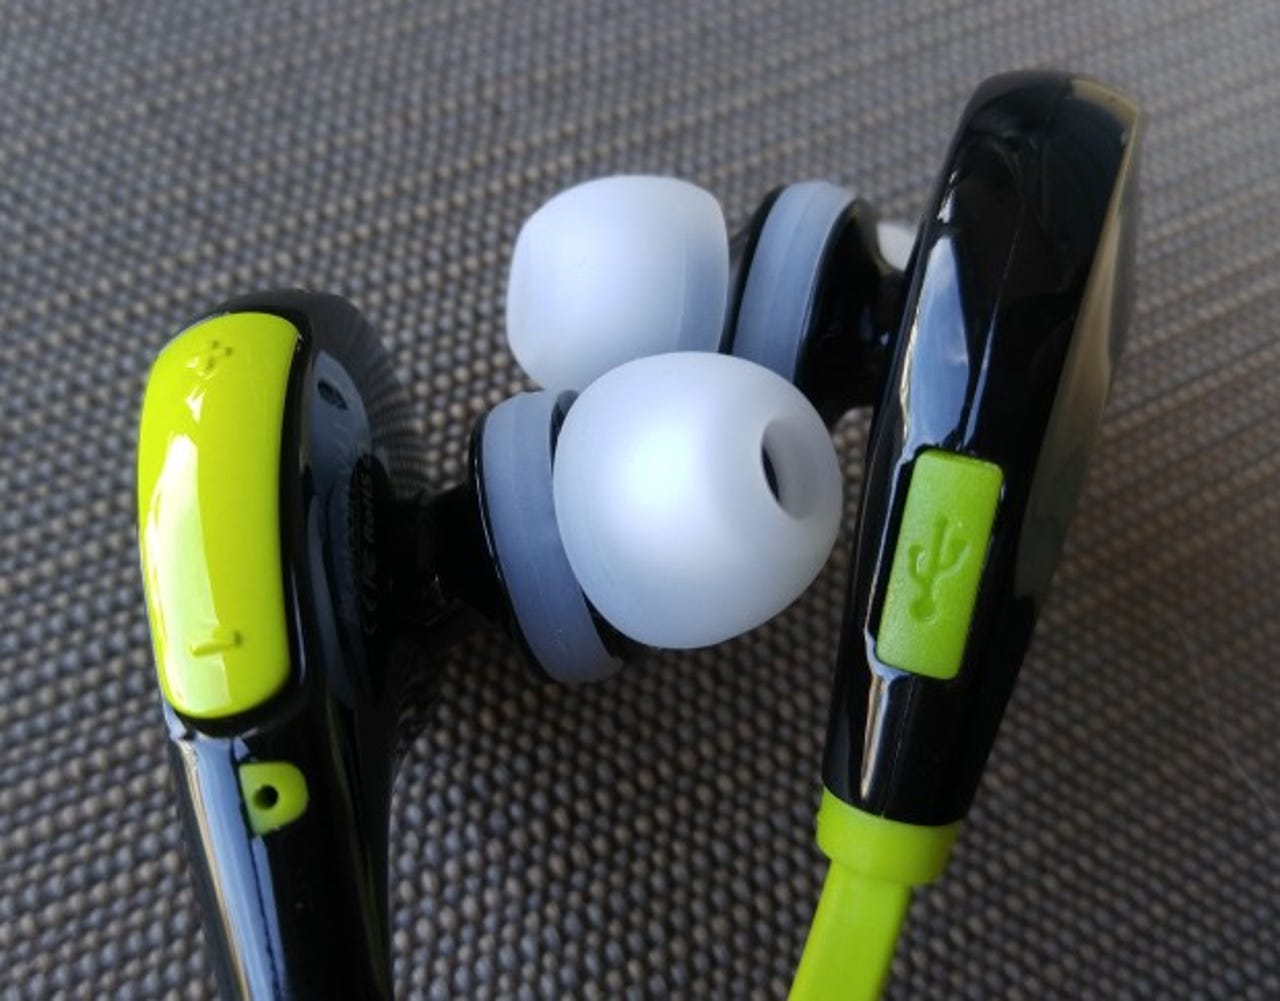 BlueAnt Embrace Stereo Headphones review: BlueAnt Embrace Stereo Headphones  - CNET